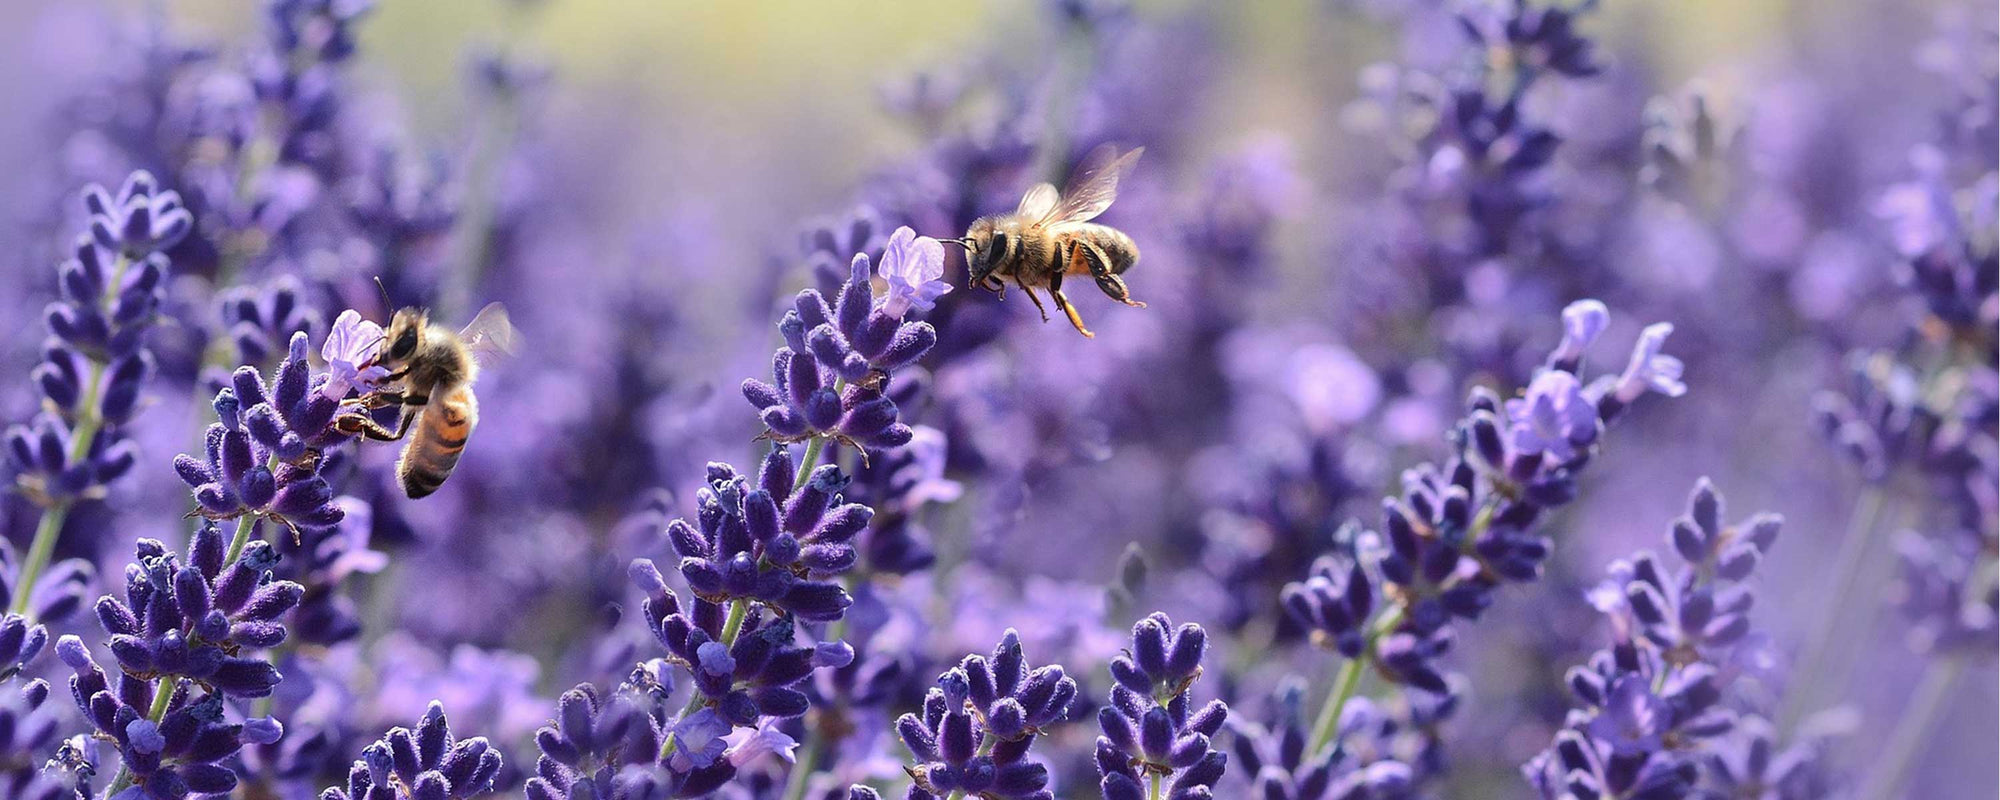 certified usda organic natural ingredient essential oils sustainable better environment nongmo lavender bee